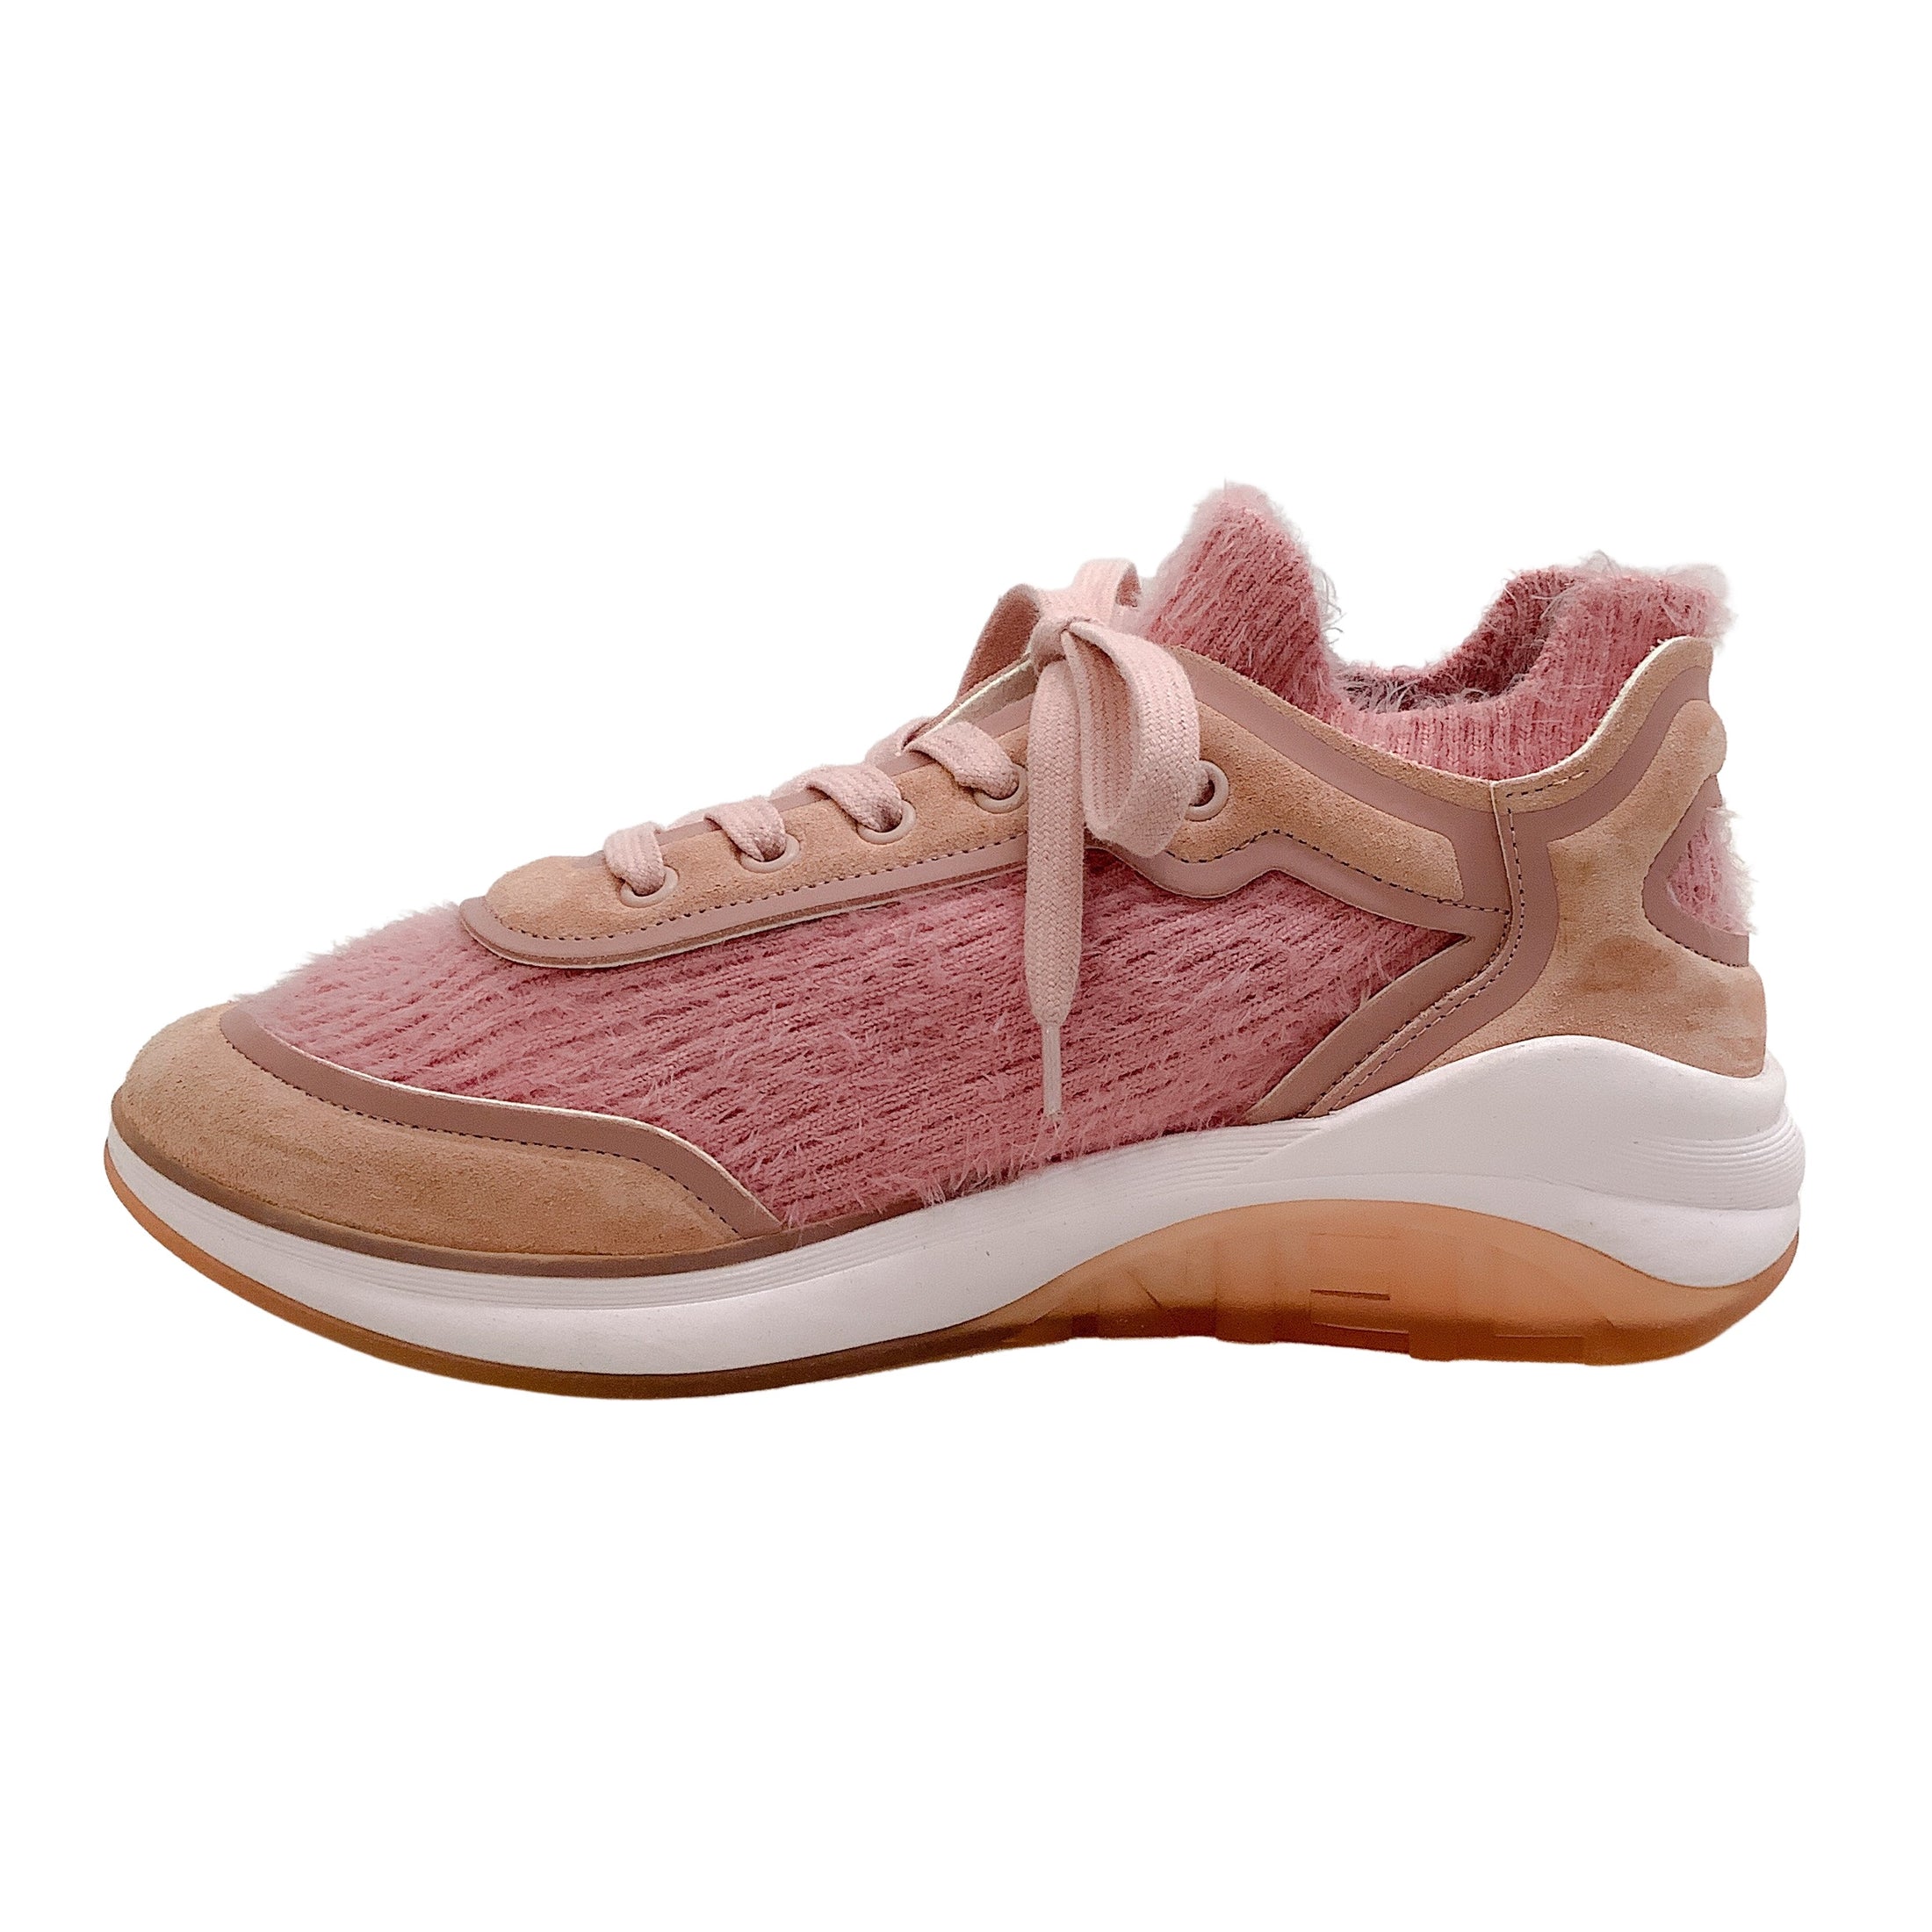 Chanel Pink Suede Calfskin Stretch Fabric CC Sneakers